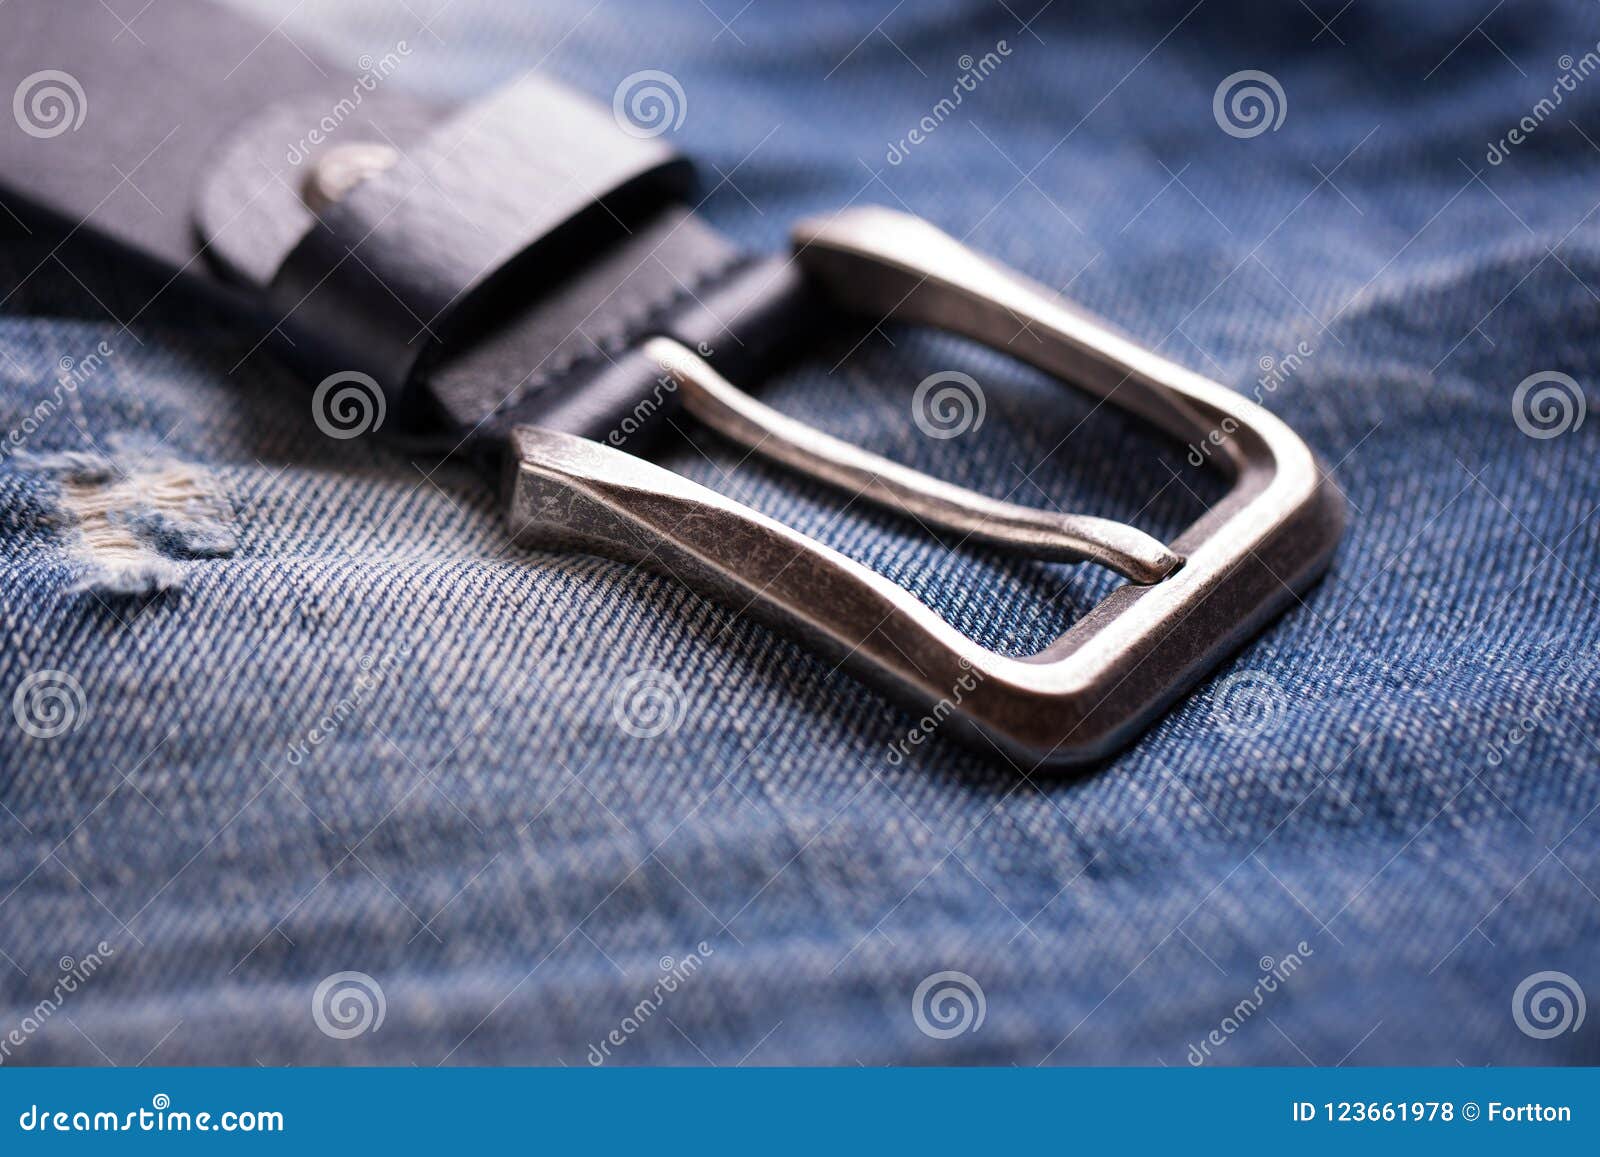 An Unbuttoned Belt Rests on a Denim Fabric Stock Photo - Image of close ...